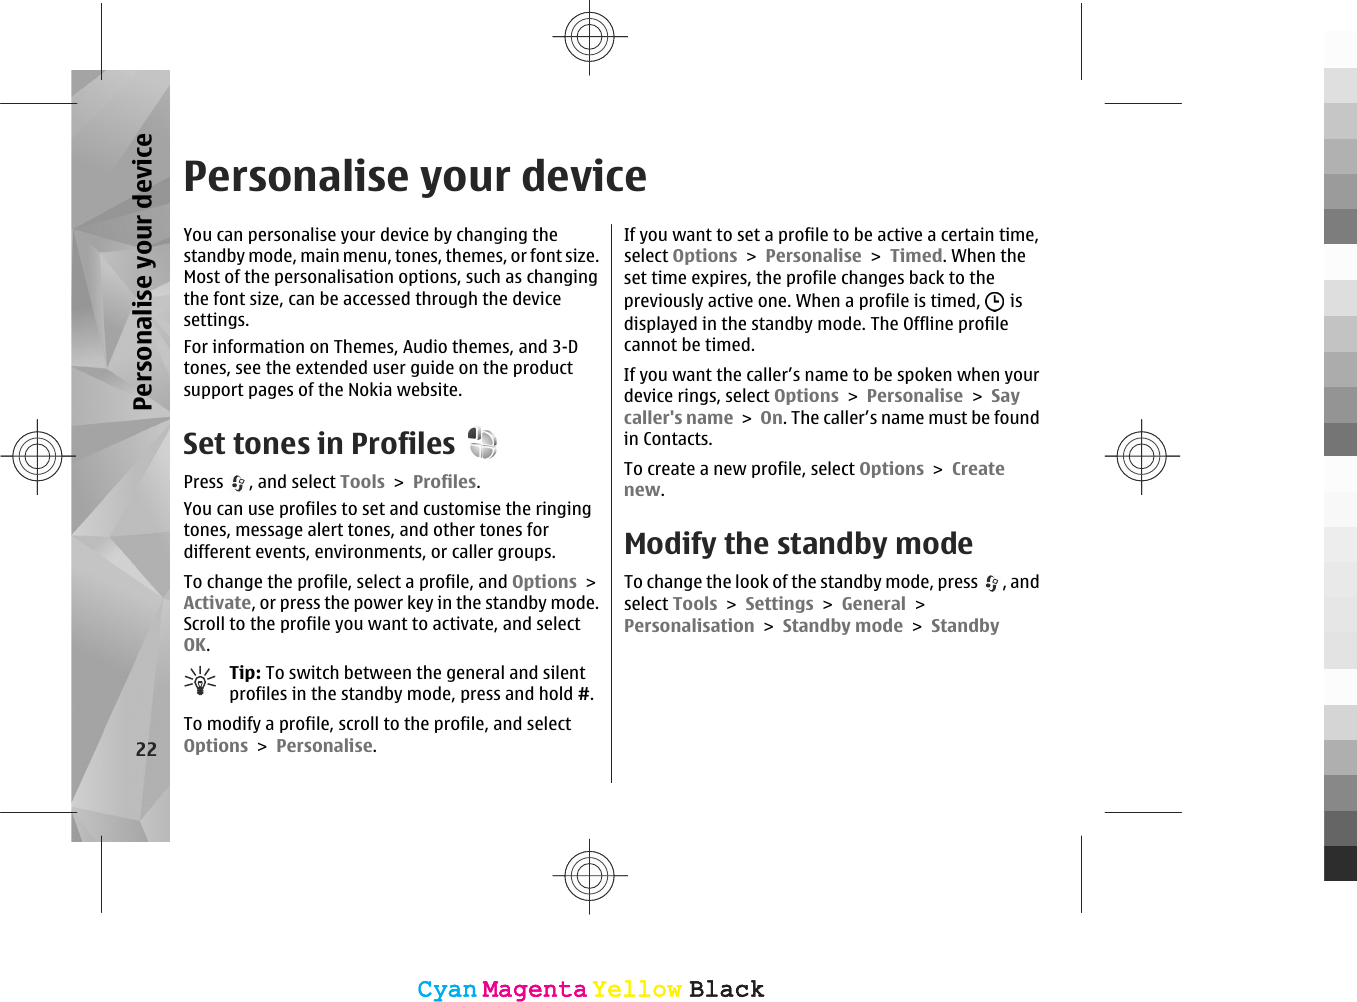 Personalise your deviceYou can personalise your device by changing thestandby mode, main menu, tones, themes, or font size.Most of the personalisation options, such as changingthe font size, can be accessed through the devicesettings.For information on Themes, Audio themes, and 3-Dtones, see the extended user guide on the productsupport pages of the Nokia website.Set tones in ProfilesPress  , and select Tools &gt; Profiles.You can use profiles to set and customise the ringingtones, message alert tones, and other tones fordifferent events, environments, or caller groups.To change the profile, select a profile, and Options &gt;Activate, or press the power key in the standby mode.Scroll to the profile you want to activate, and selectOK.Tip: To switch between the general and silentprofiles in the standby mode, press and hold #.To modify a profile, scroll to the profile, and selectOptions &gt; Personalise.If you want to set a profile to be active a certain time,select Options &gt; Personalise &gt; Timed. When theset time expires, the profile changes back to thepreviously active one. When a profile is timed,   isdisplayed in the standby mode. The Offline profilecannot be timed.If you want the caller’s name to be spoken when yourdevice rings, select Options &gt; Personalise &gt; Saycaller&apos;s name &gt; On. The caller’s name must be foundin Contacts.To create a new profile, select Options &gt; Createnew.Modify the standby modeTo change the look of the standby mode, press  , andselect Tools &gt; Settings &gt; General &gt;Personalisation &gt; Standby mode &gt; Standby22Personalise your deviceCyanCyanMagentaMagentaYellowYellowBlackBlackCyanCyanMagentaMagentaYellowYellowBlackBlack